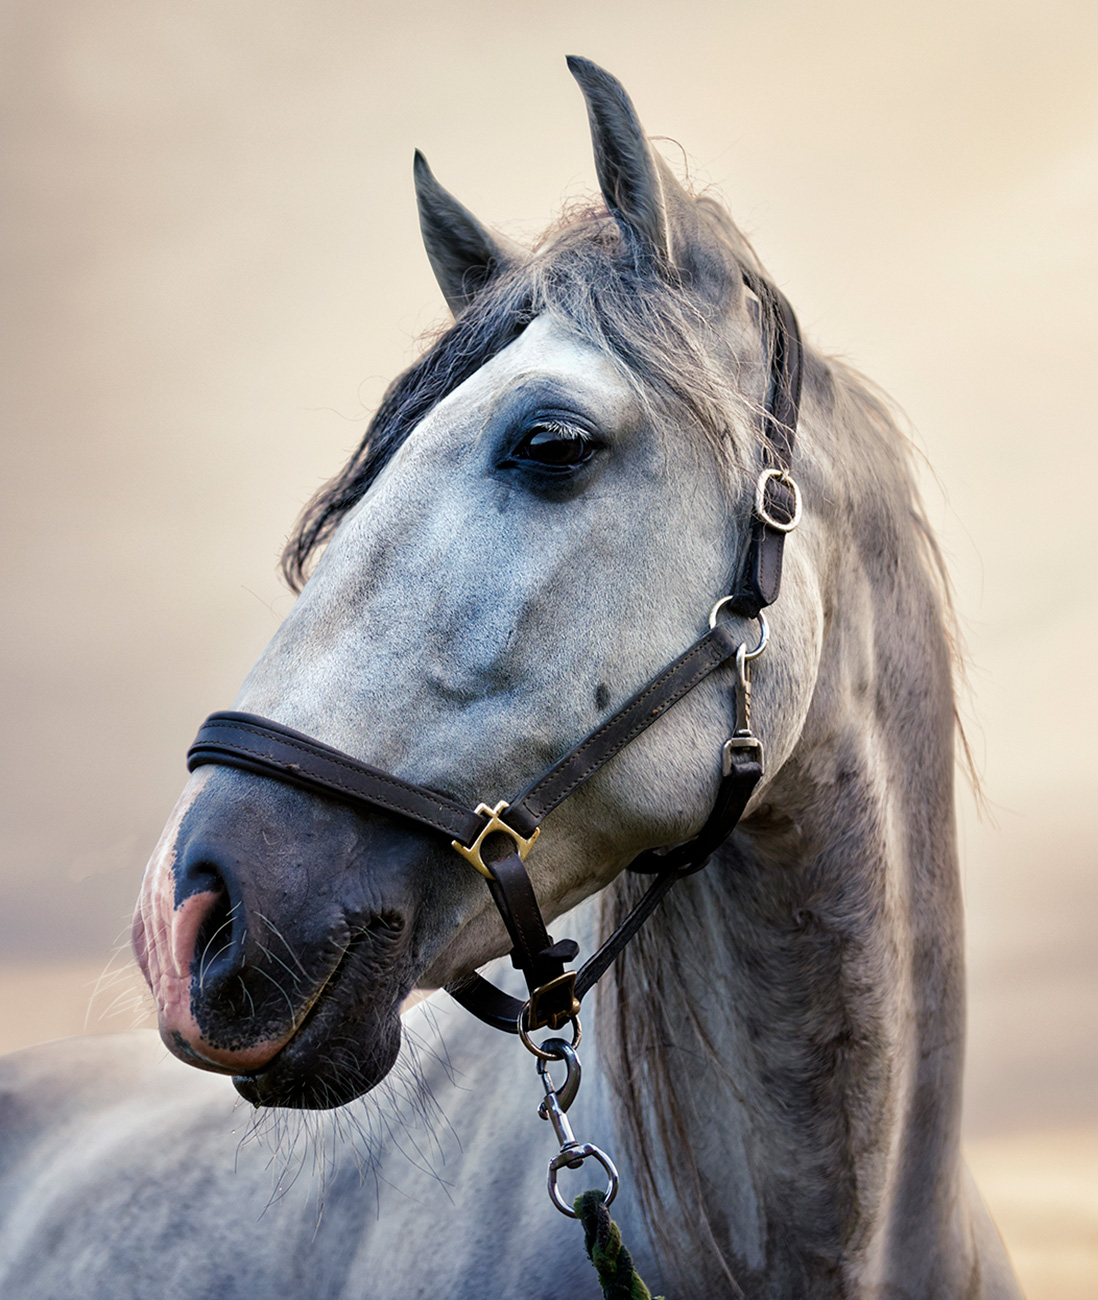 a close-up of a horse's head wearing a bridle, featuring out-of-focus outdoor surroundings in the background. These atmospheric images bring forth the raw beauty of the equine subject in a beautiful, natural setting.